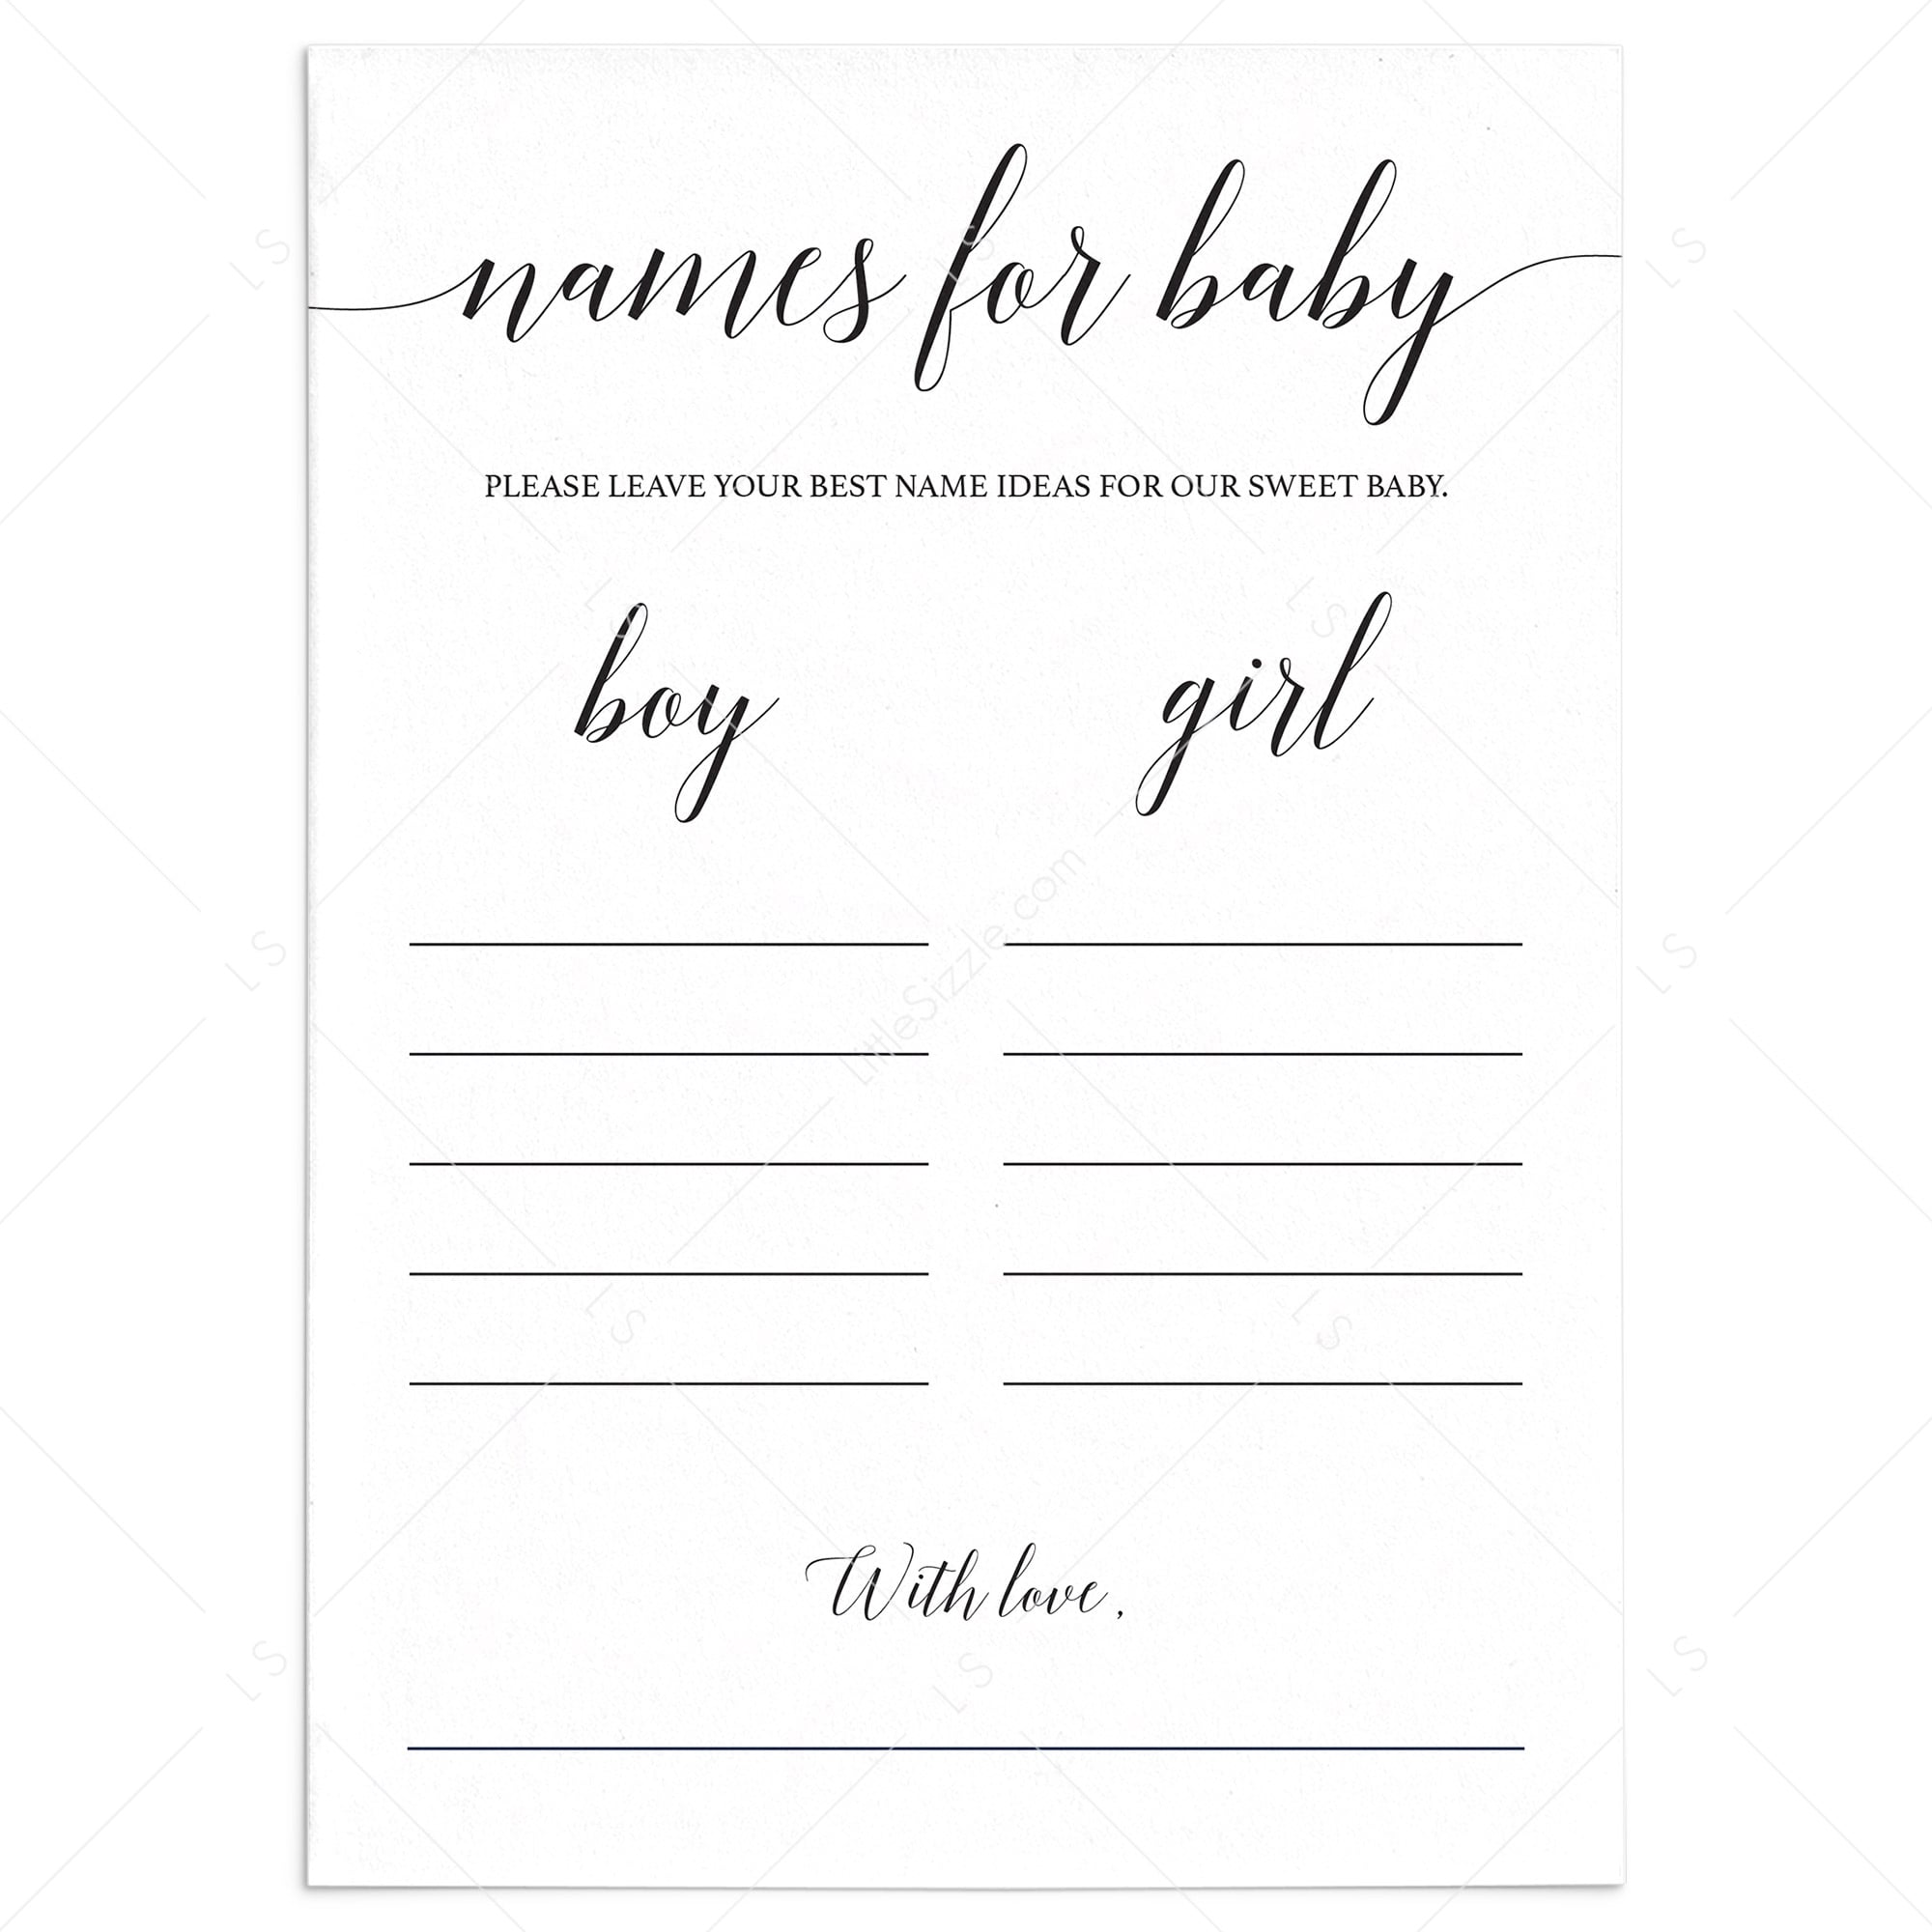 Gender reveal names for baby cards printable by LittleSizzle